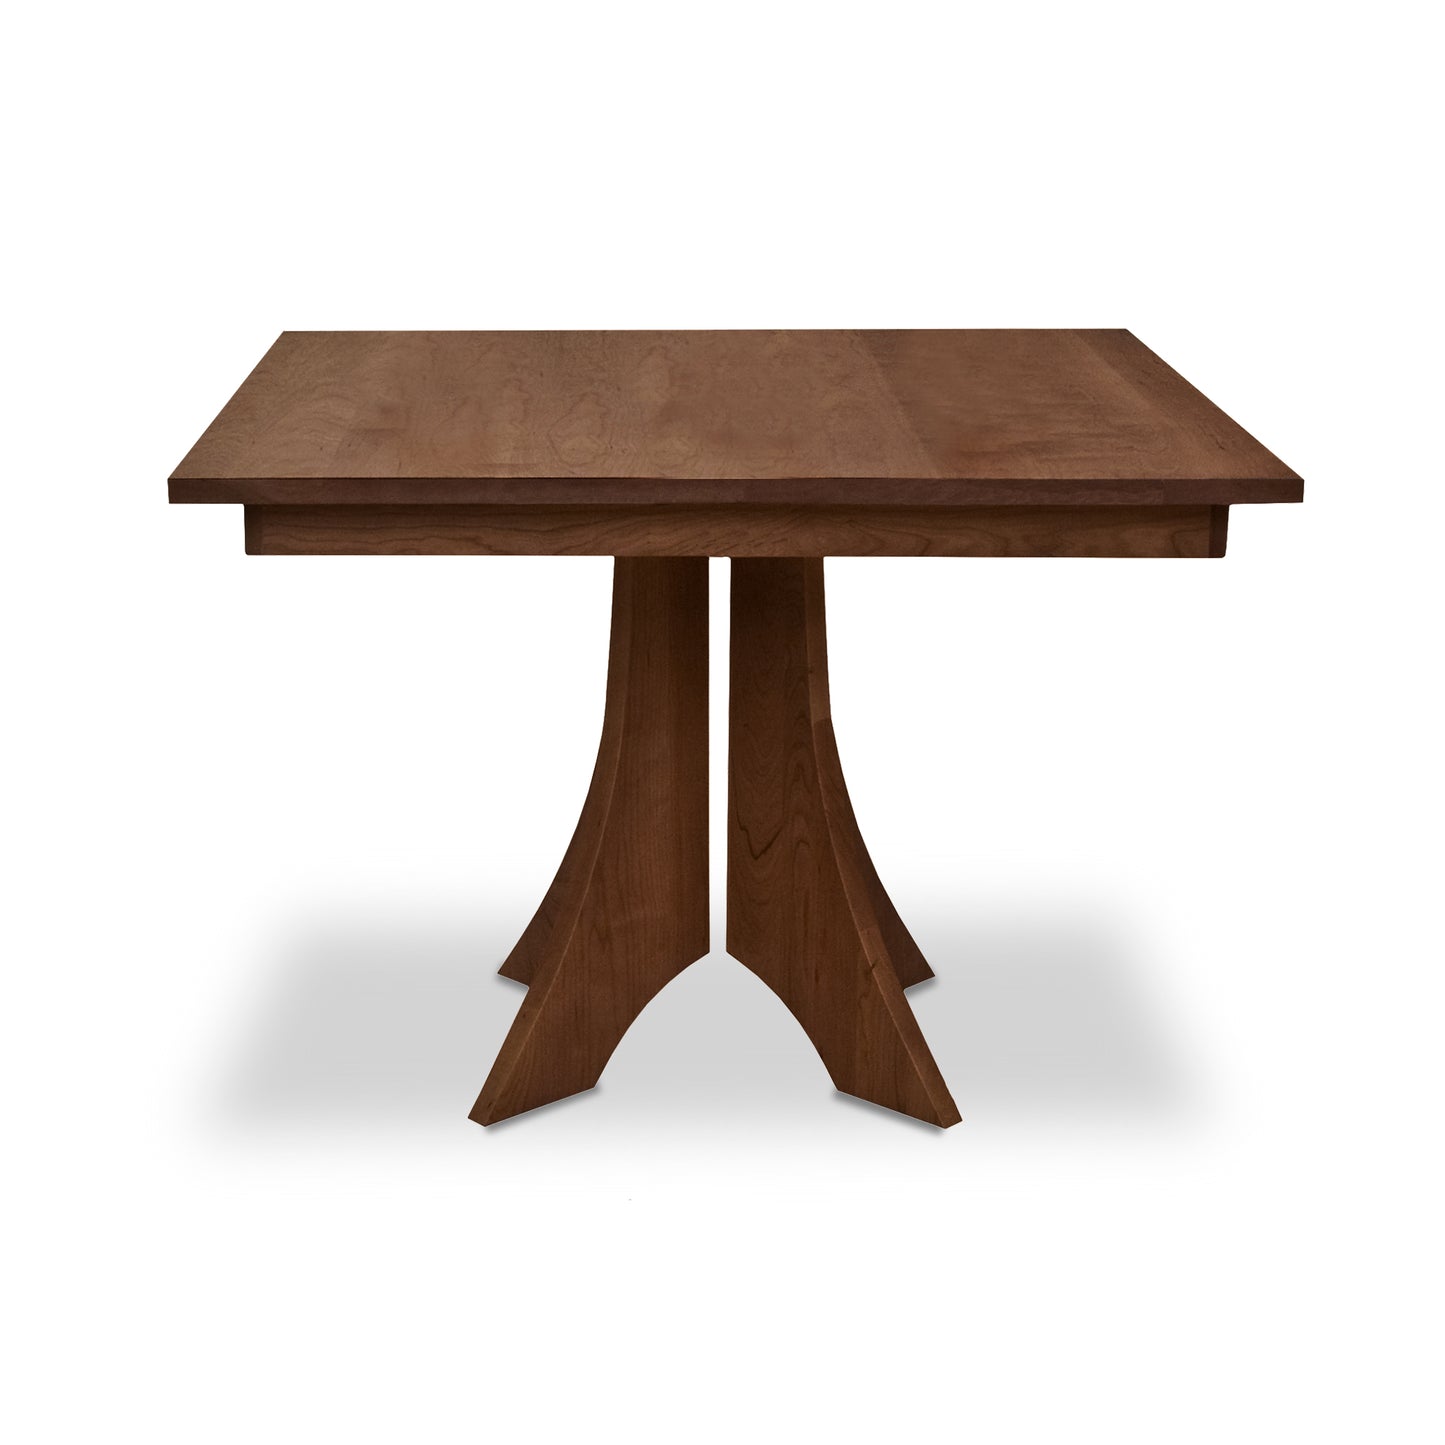 A Hampton Split Pedestal Square Table by Lyndon Furniture, a solid wood dining table with a pedestal base.